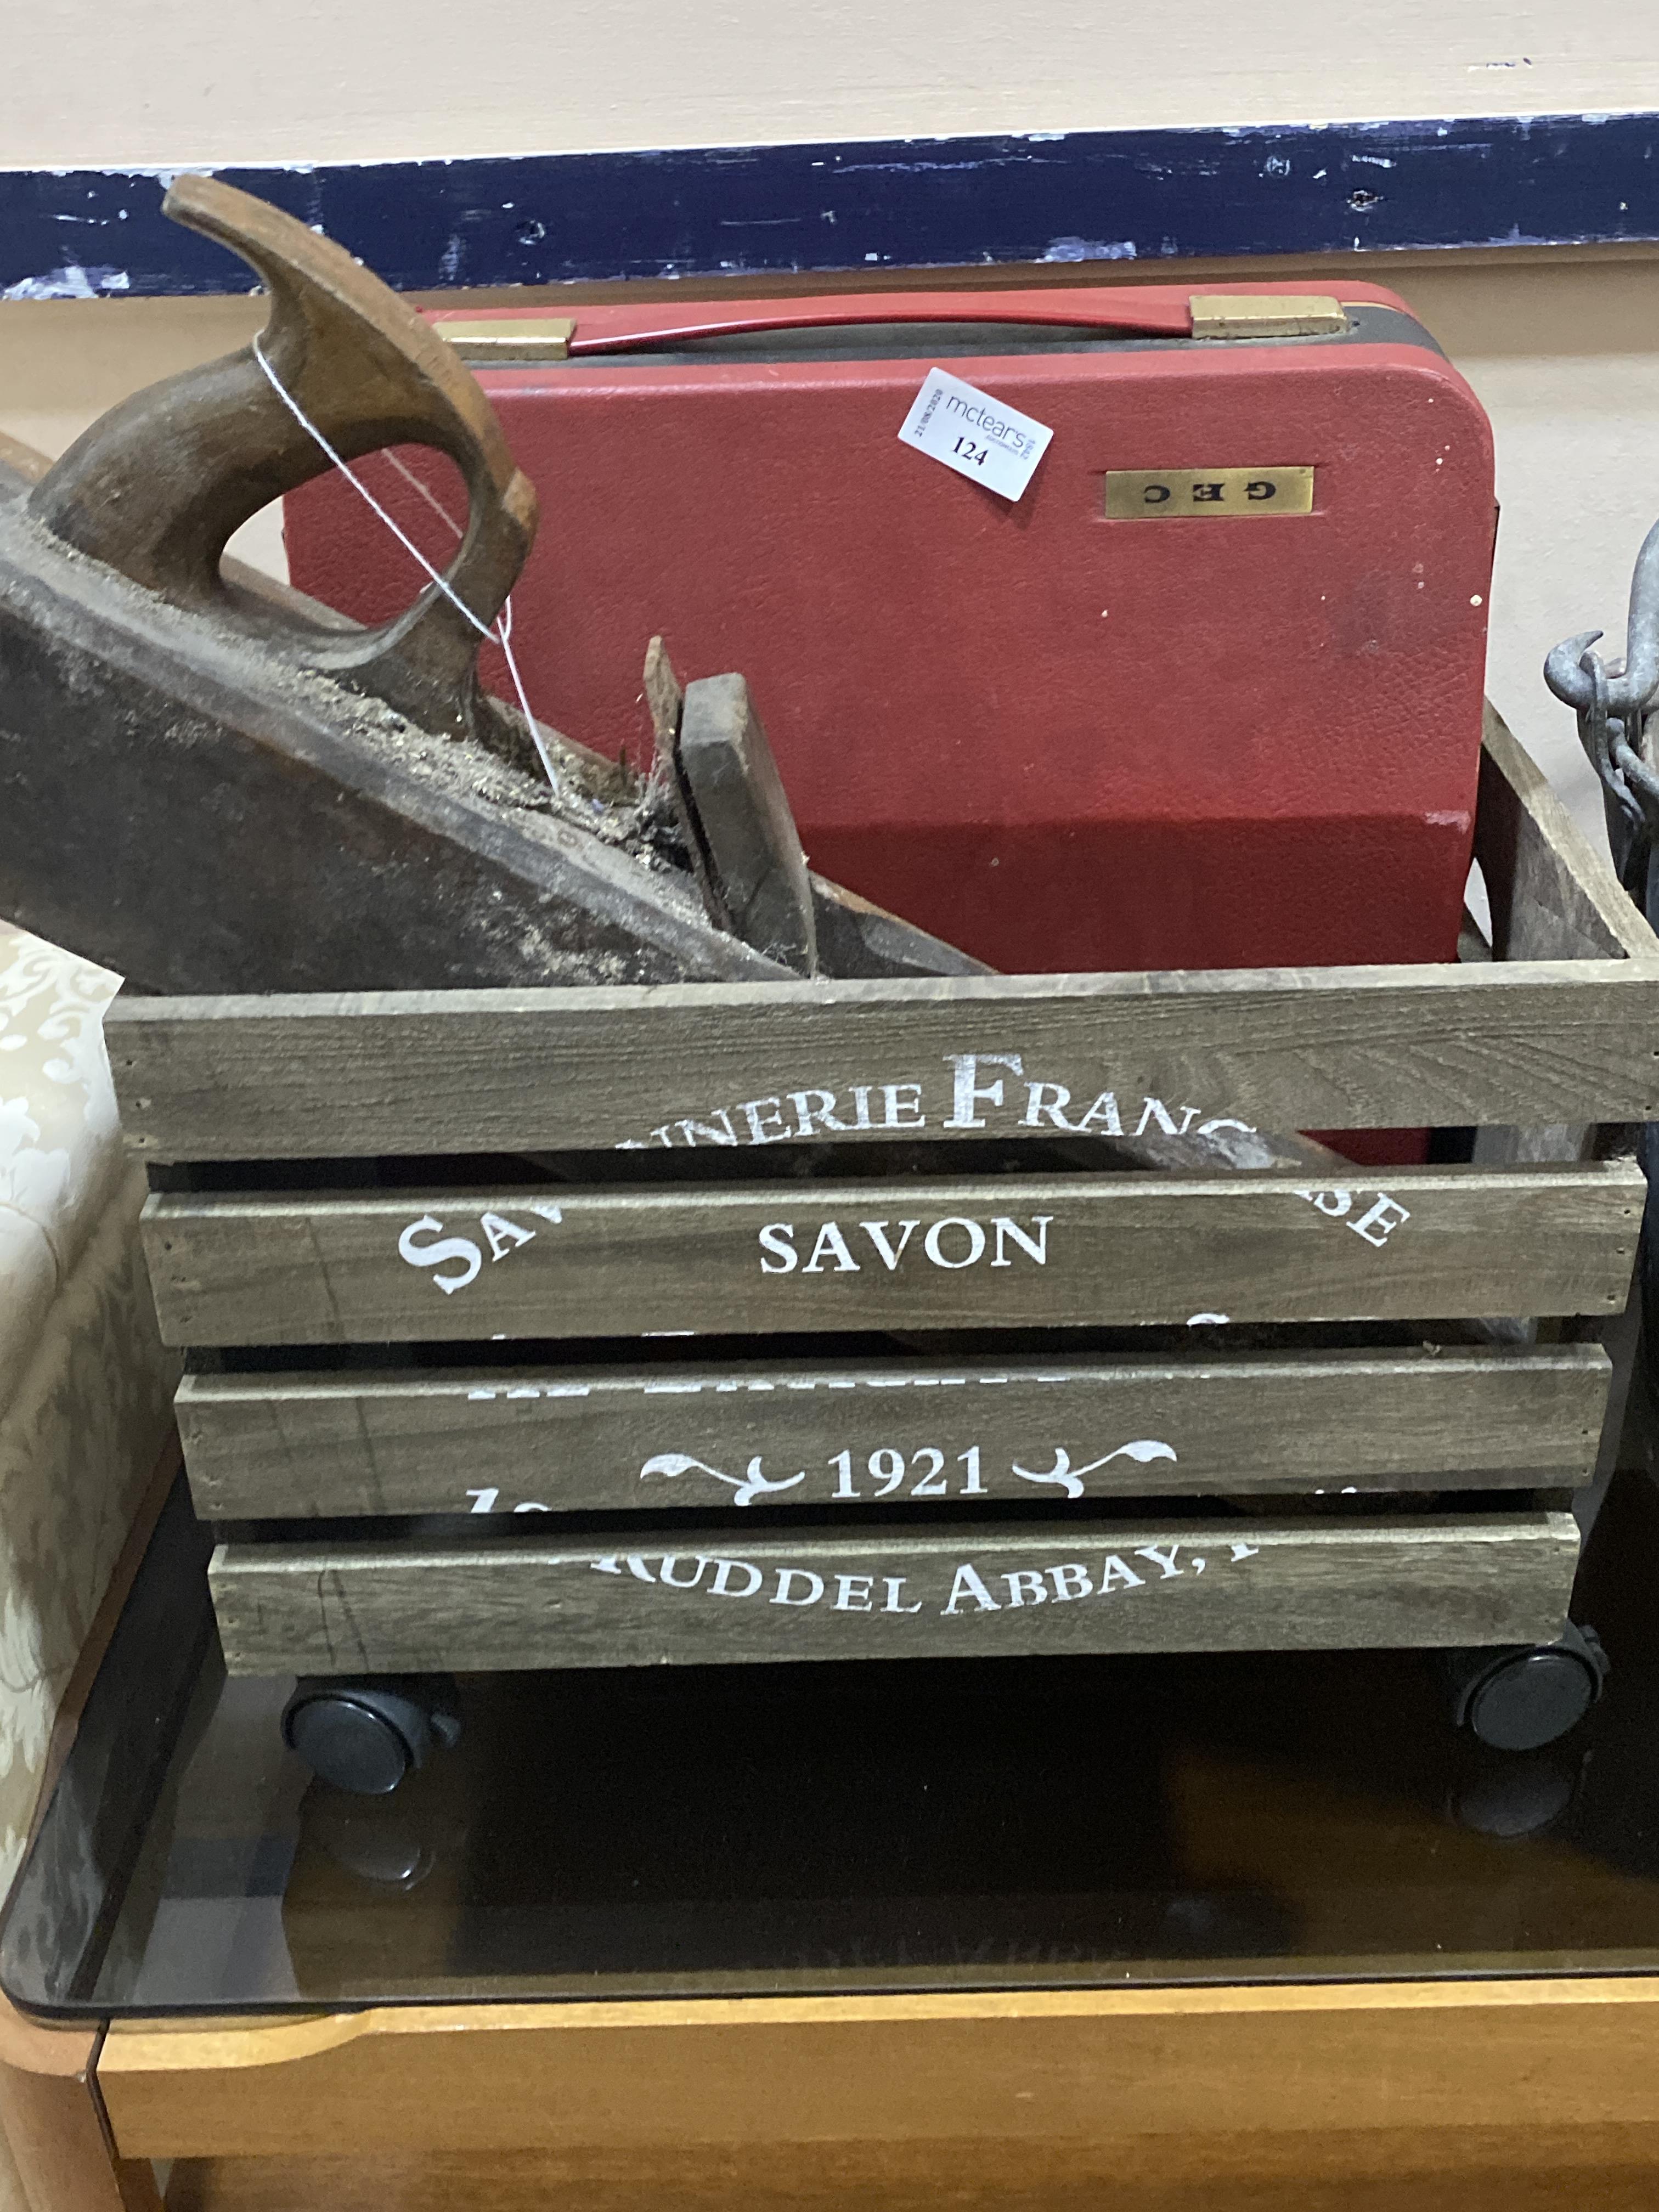 A VINTAGE TYPEWRITER, WOOD PLANE, WOODEN CRATE AND BUCKETS